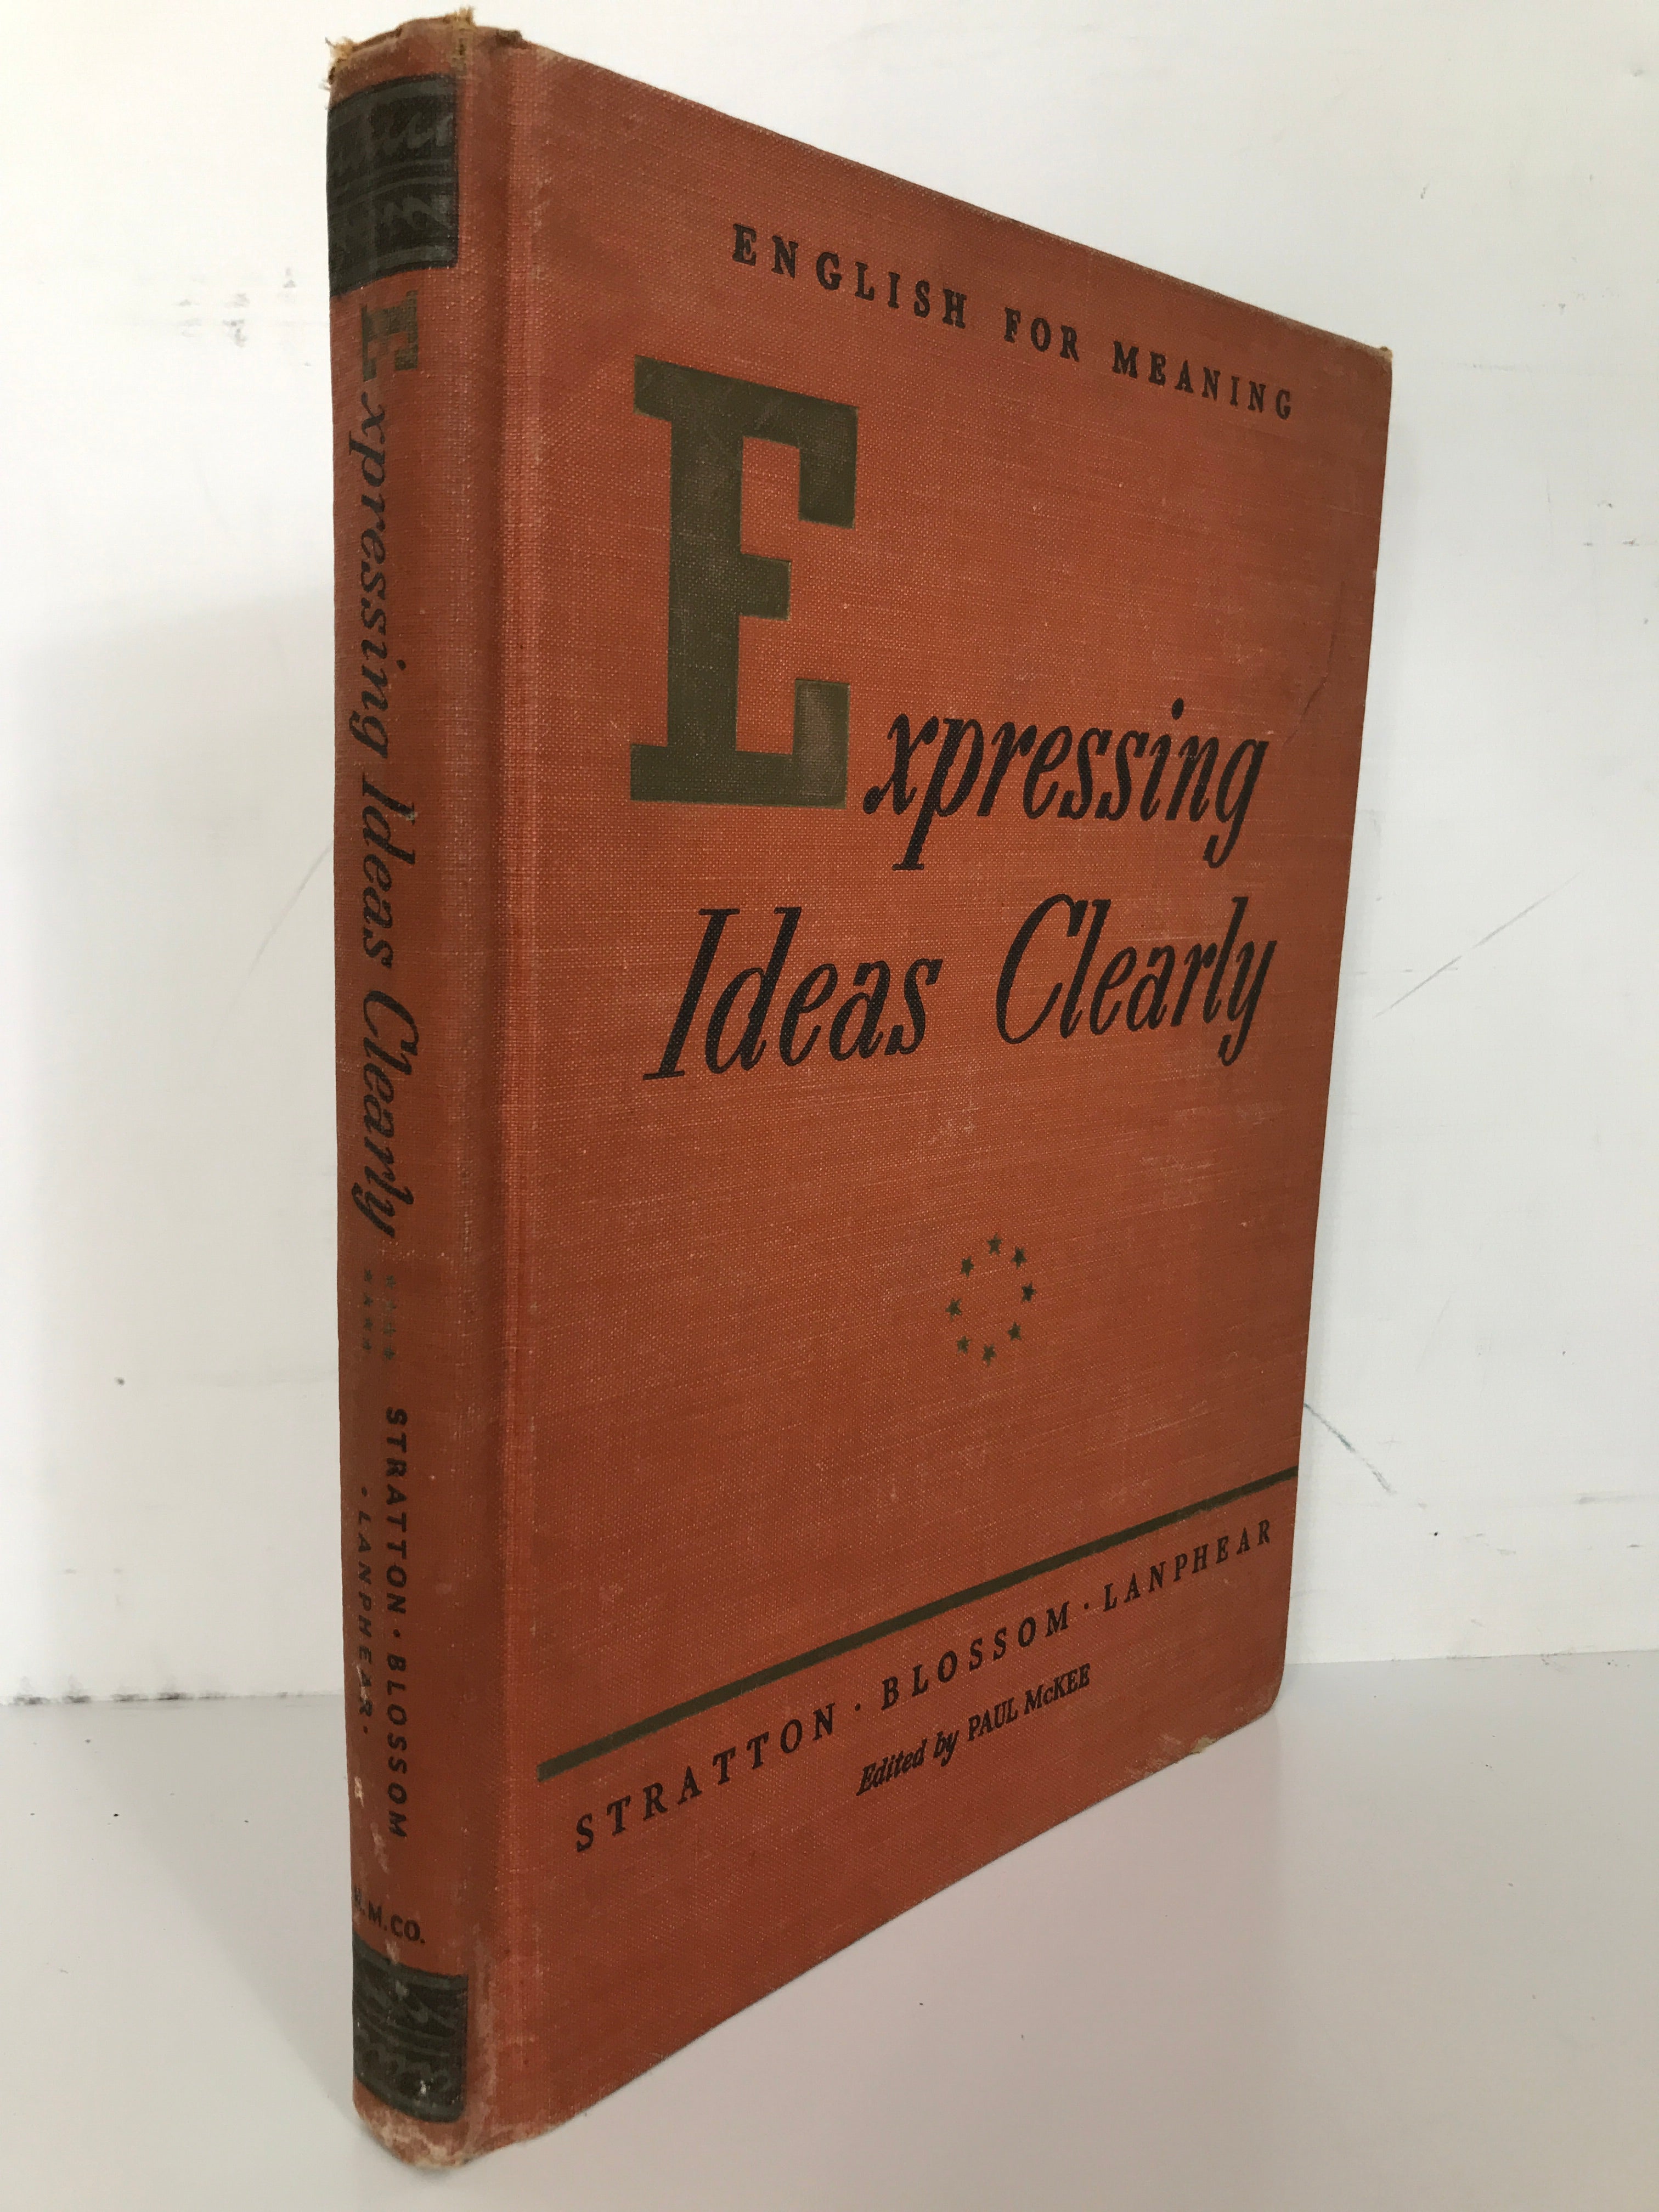 English Text: Expressing Ideas Clearly by Stratton, Blossom, & Lanphear 1942 HC